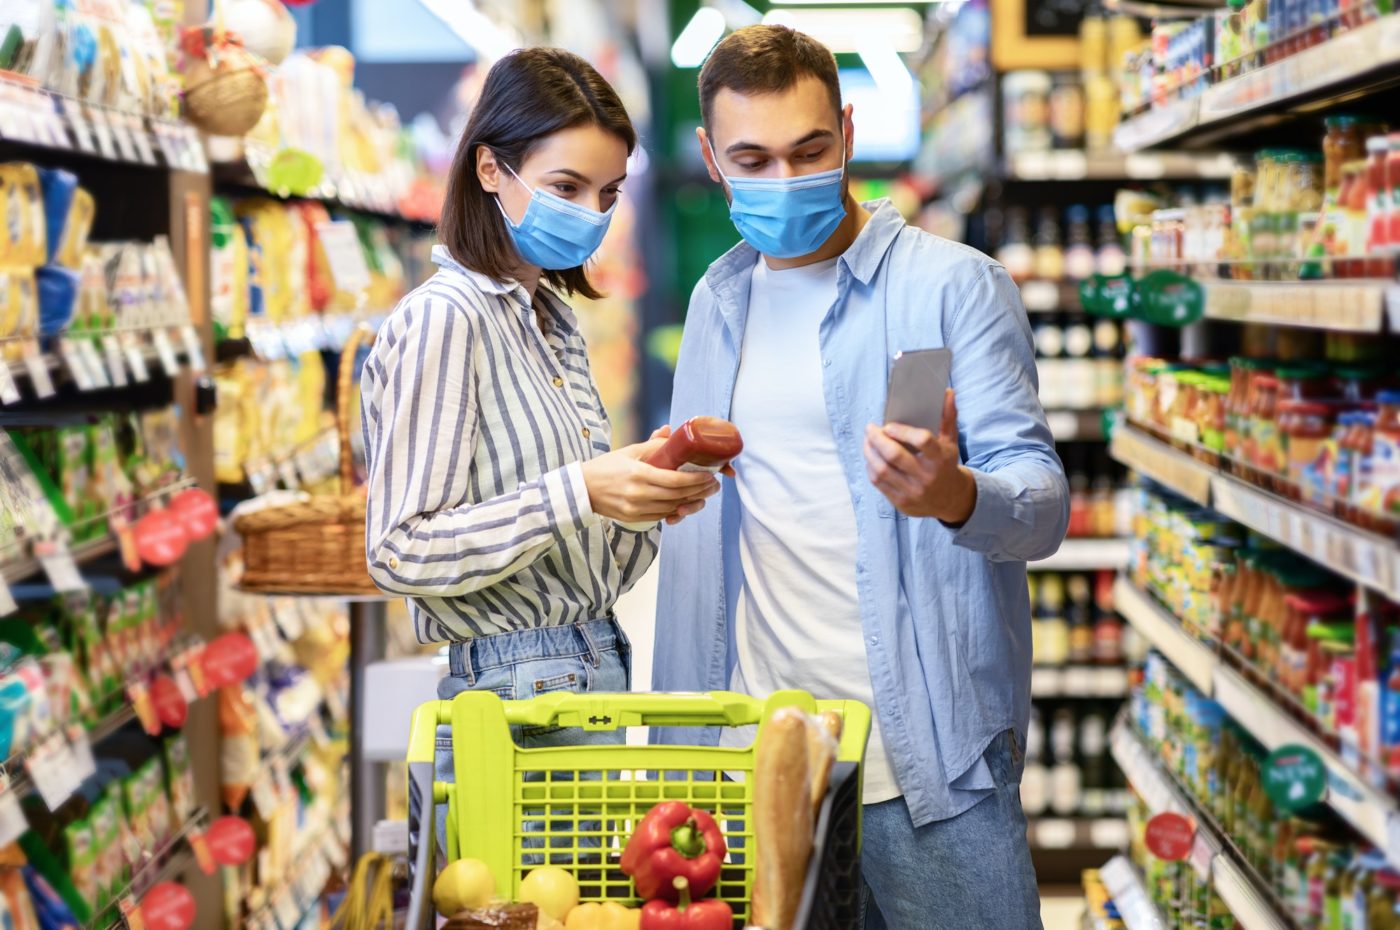 Young family in masks with phone shopping in supermarket